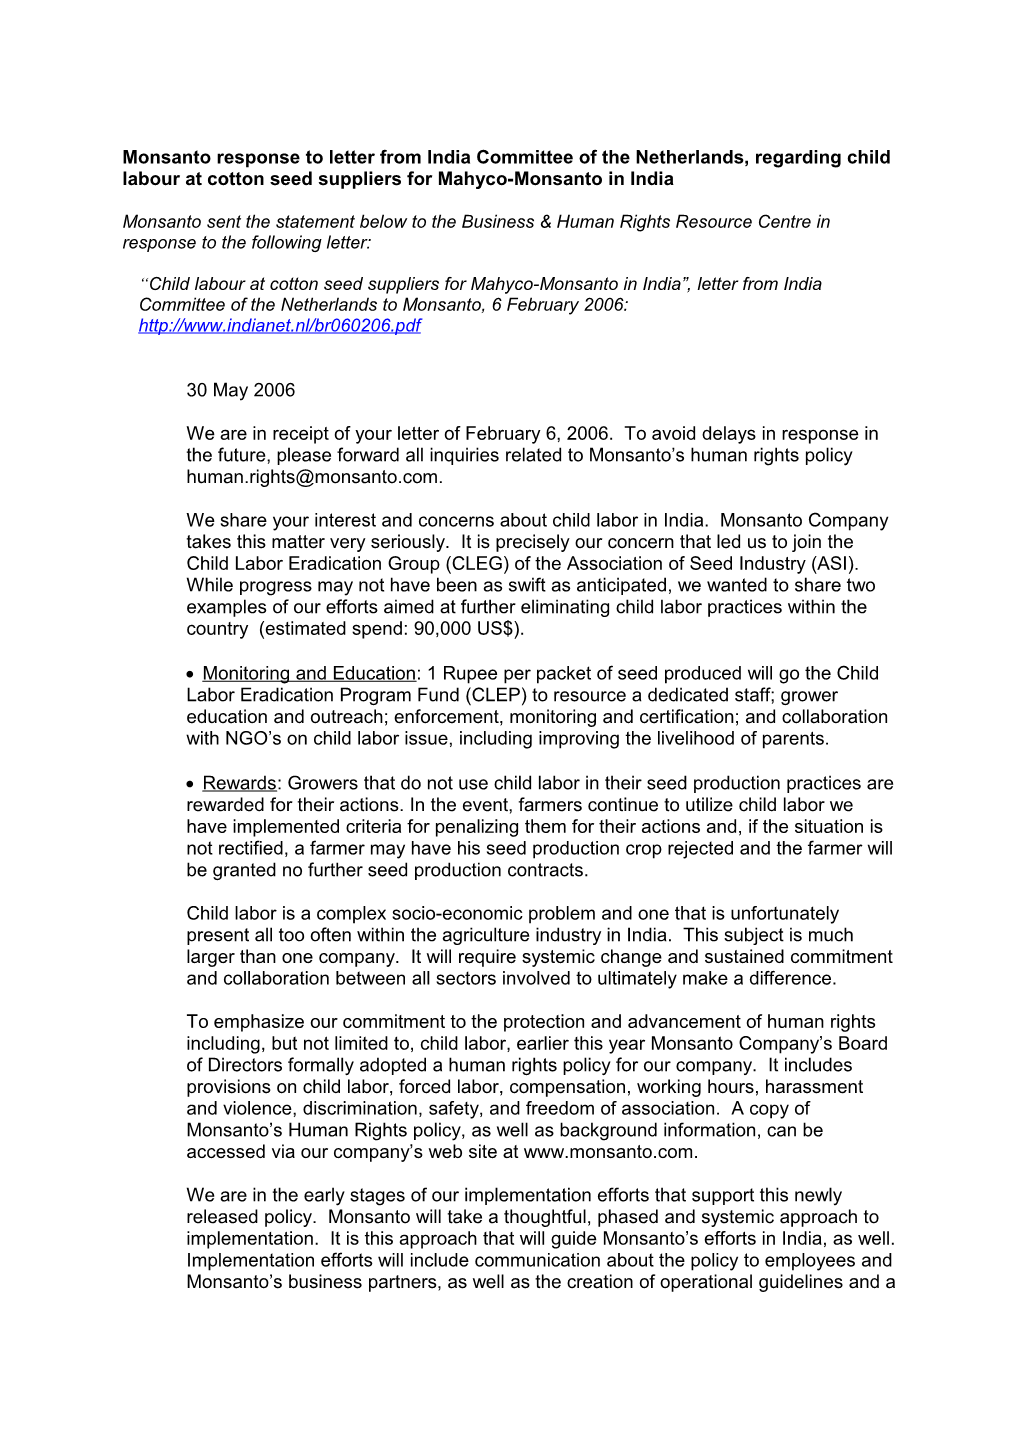 Monsanto Response to Letter from India Committee of the Netherlands, Regarding Child Labour